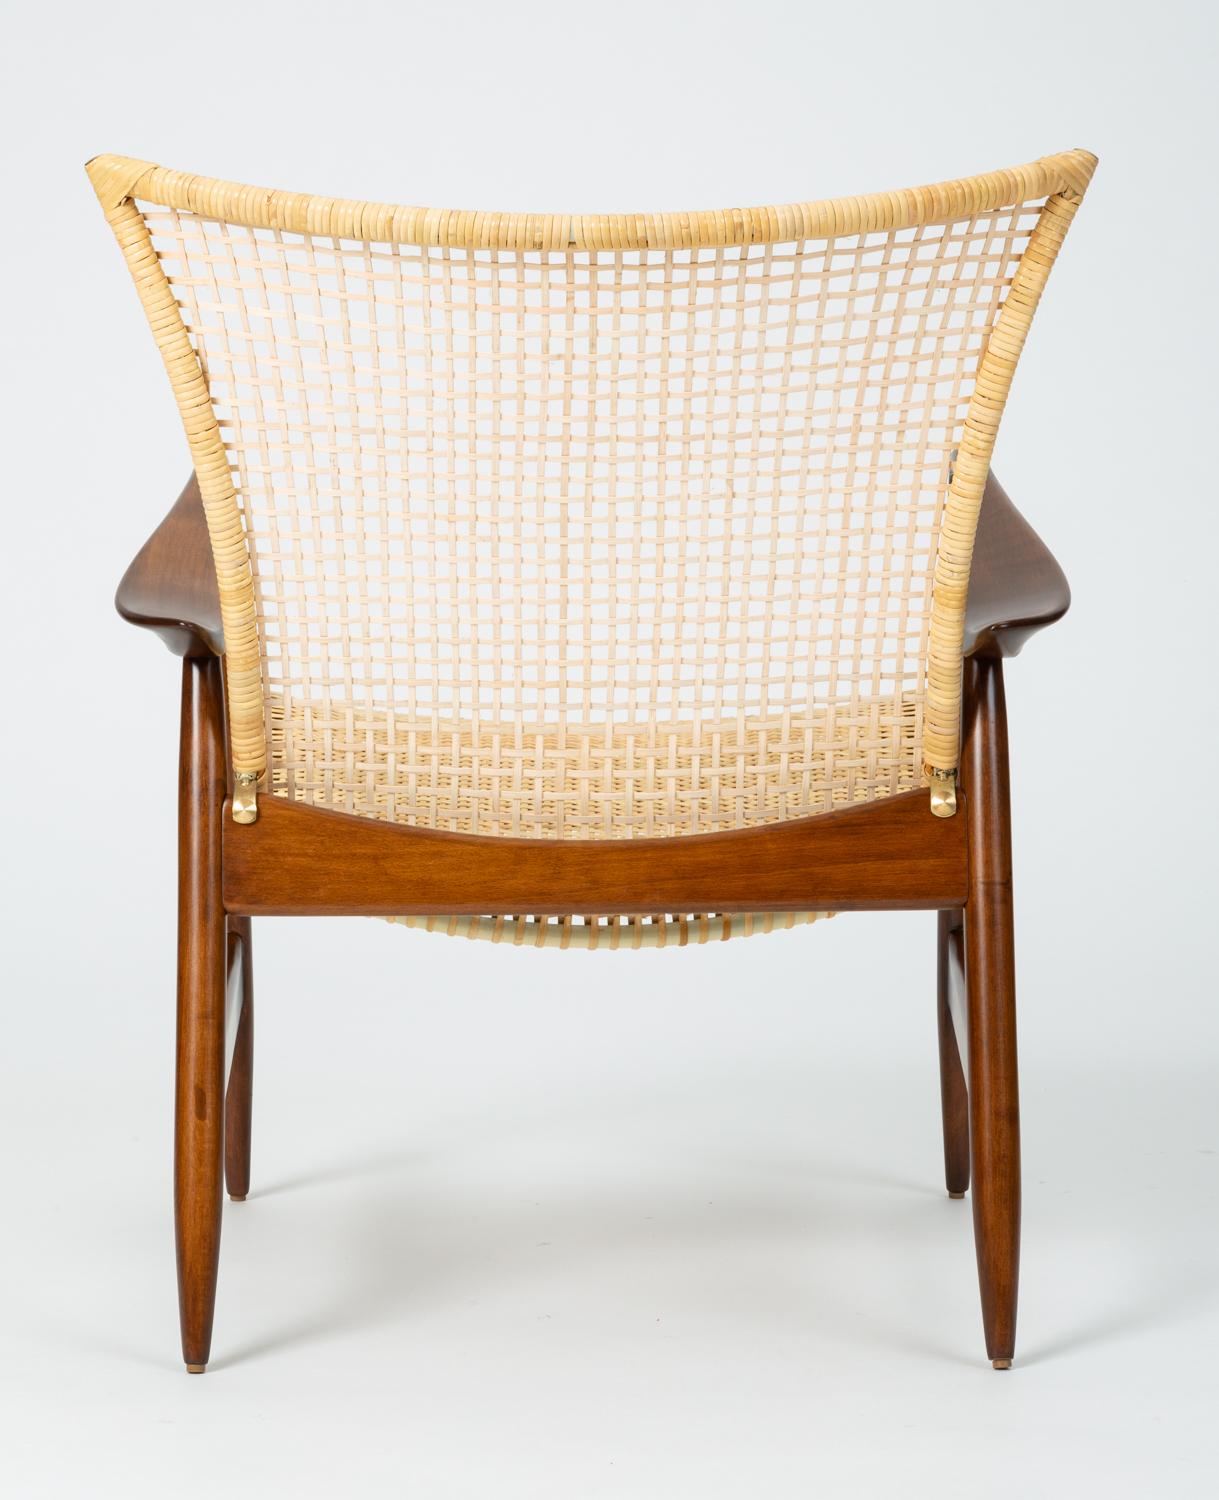 Hand-Woven Lounge Chair with Cane Seat by Ib Kofod-Larsen for Selig